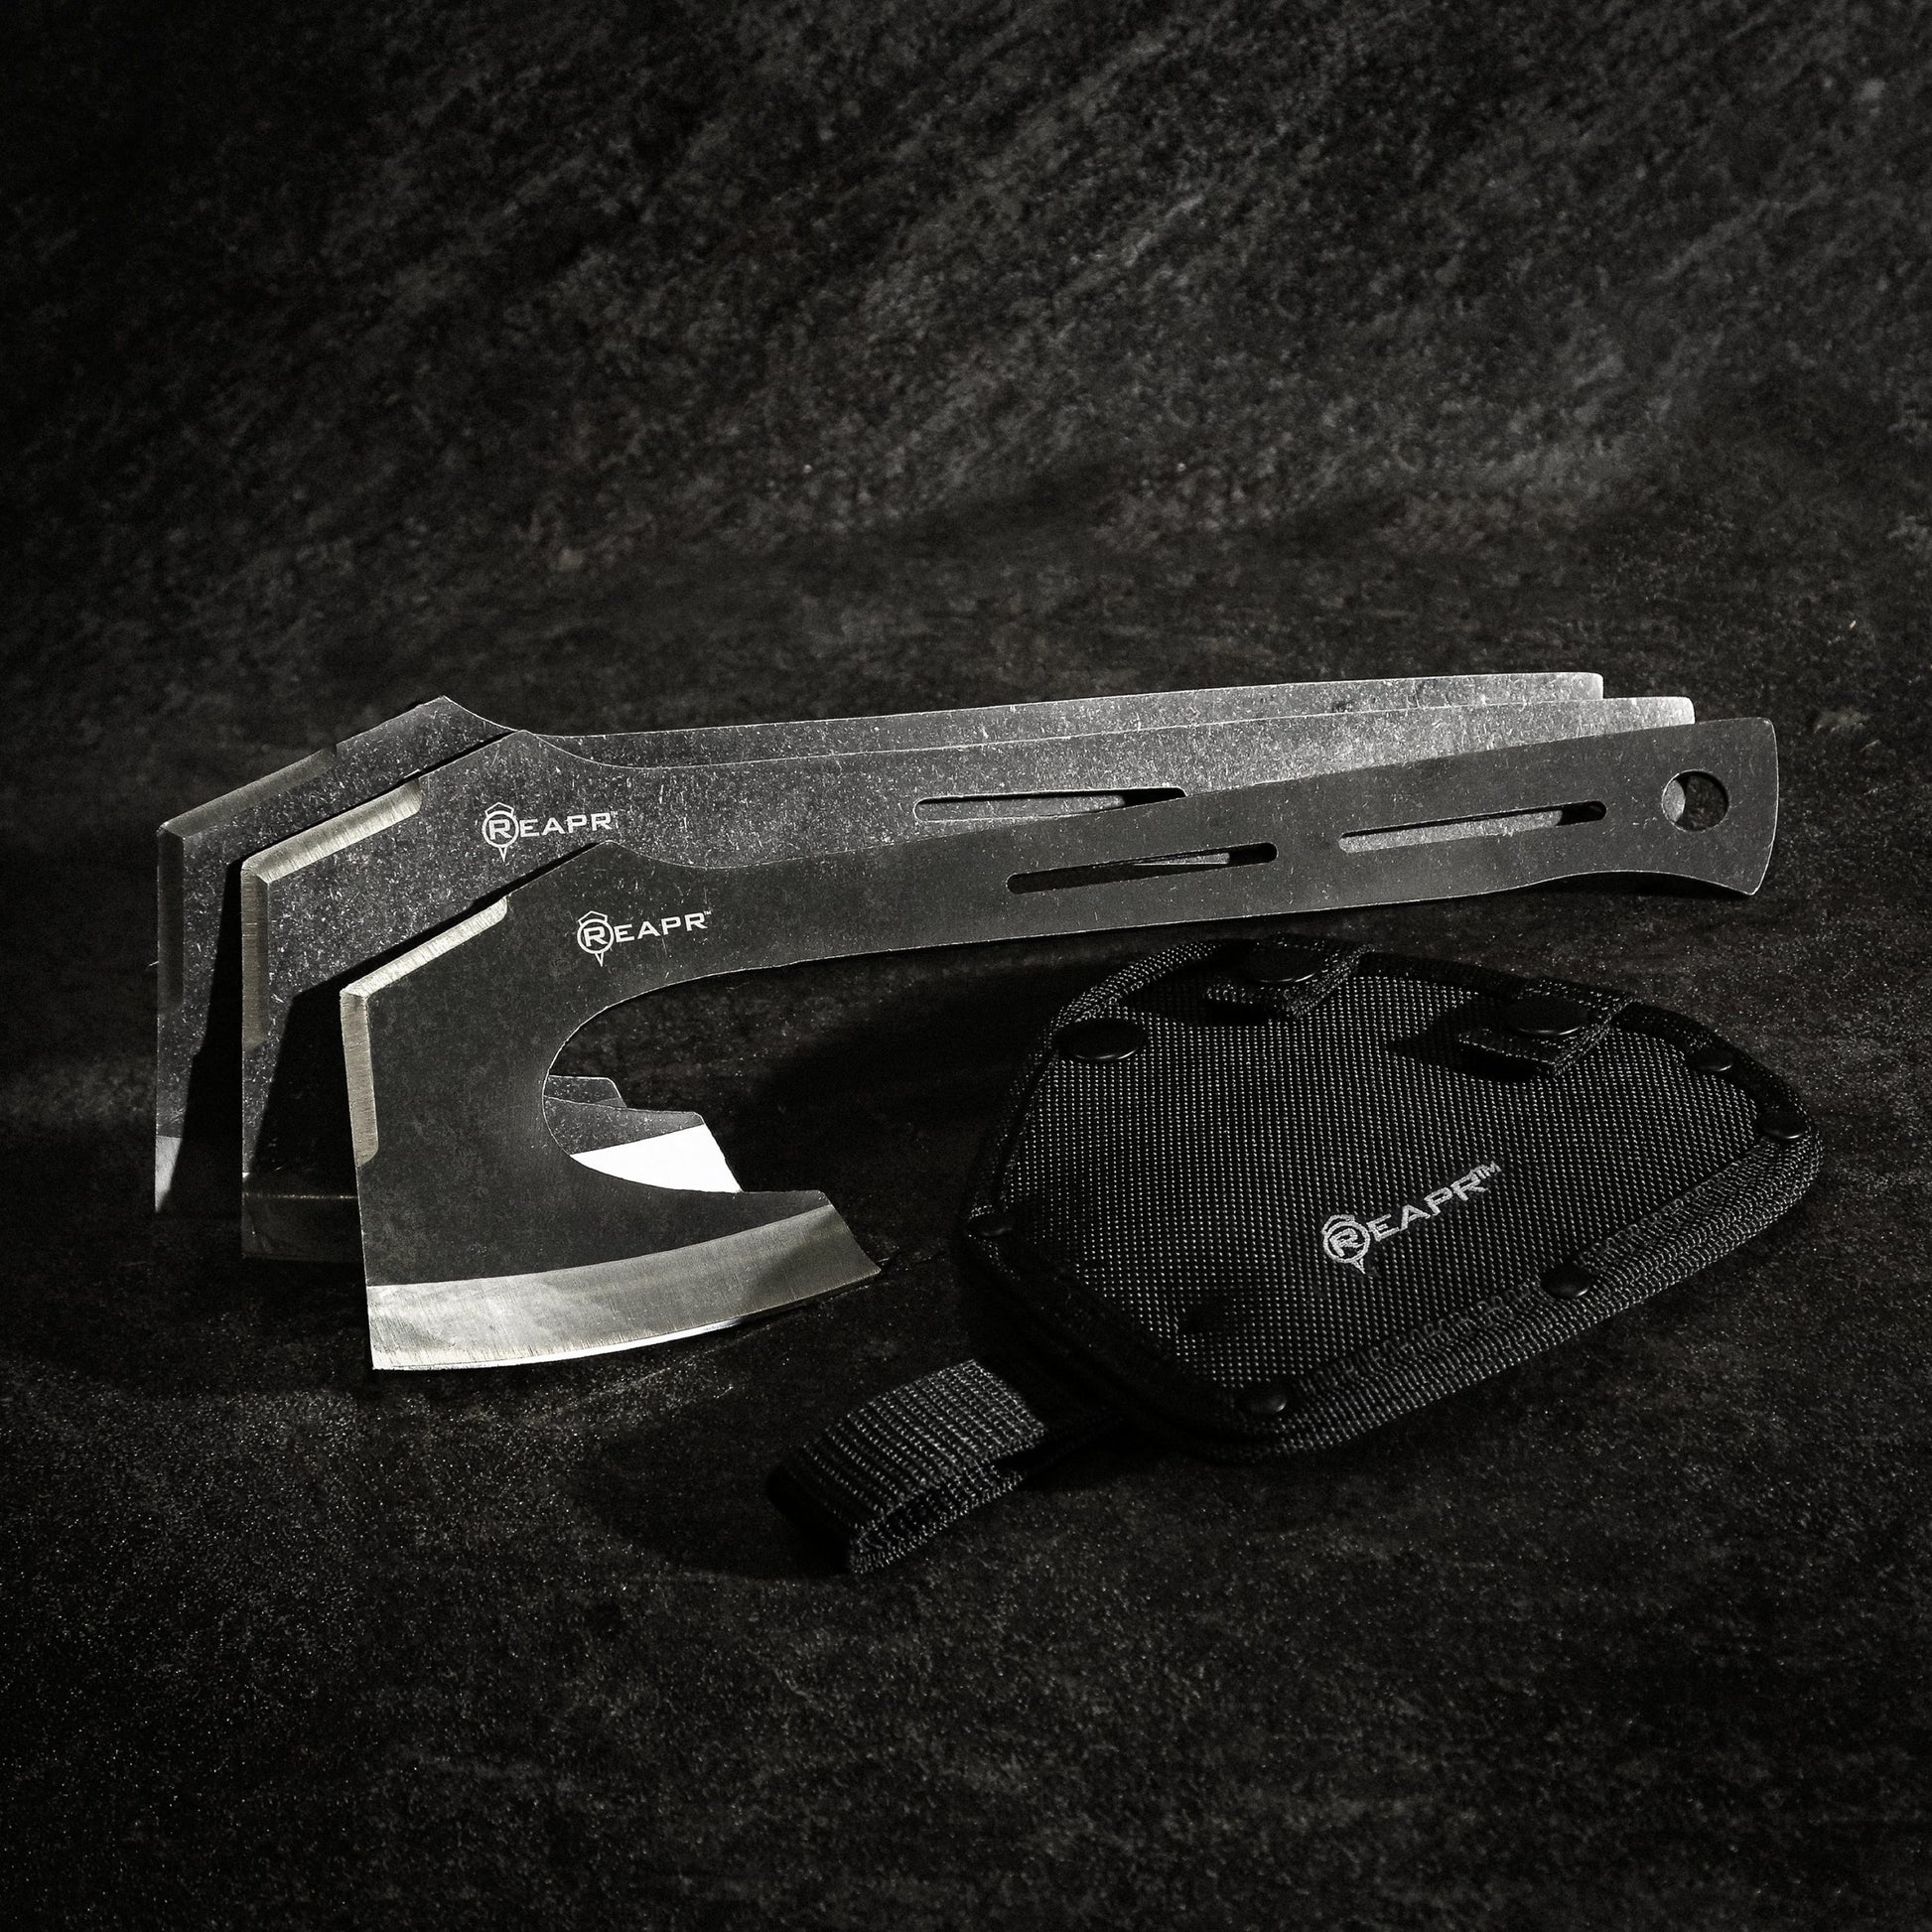 Find your perfect set of throwers in the Chuk 3 Piece Axe Set. Lightweight and ready to fly, the 3-5/8” stonewashed finished blade is perfectly balanced. These Axes are a great recreational tool for camping, parties, barbecues and more. www.defenceqstore.com.au